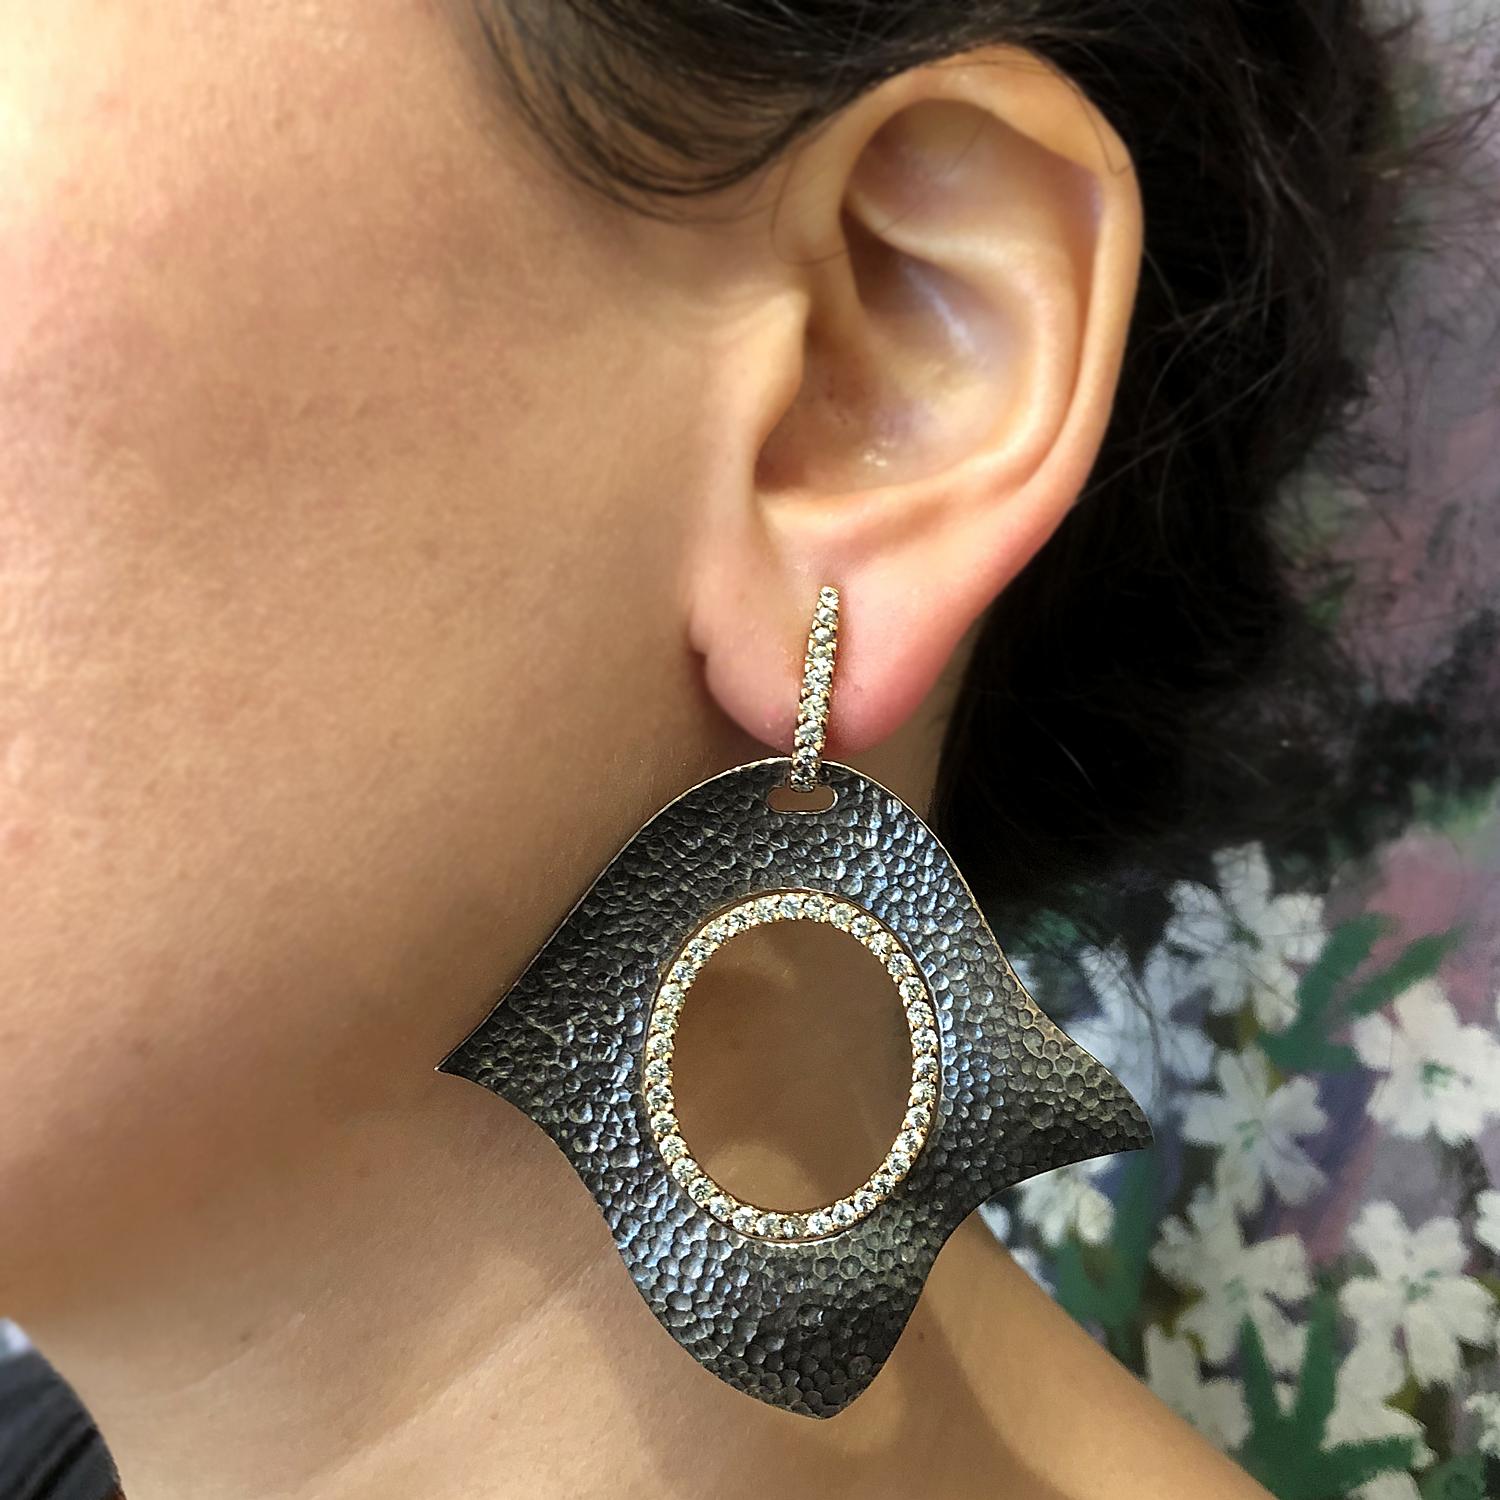 A designer pair of earrings which incorporates both 18K rose gold and textured silver with a hammered finish. Round green amethyst is set on the 18K rose gold giving the earrings sparkle and life.

Dimensions: 2.75 x 1.35 inches 
